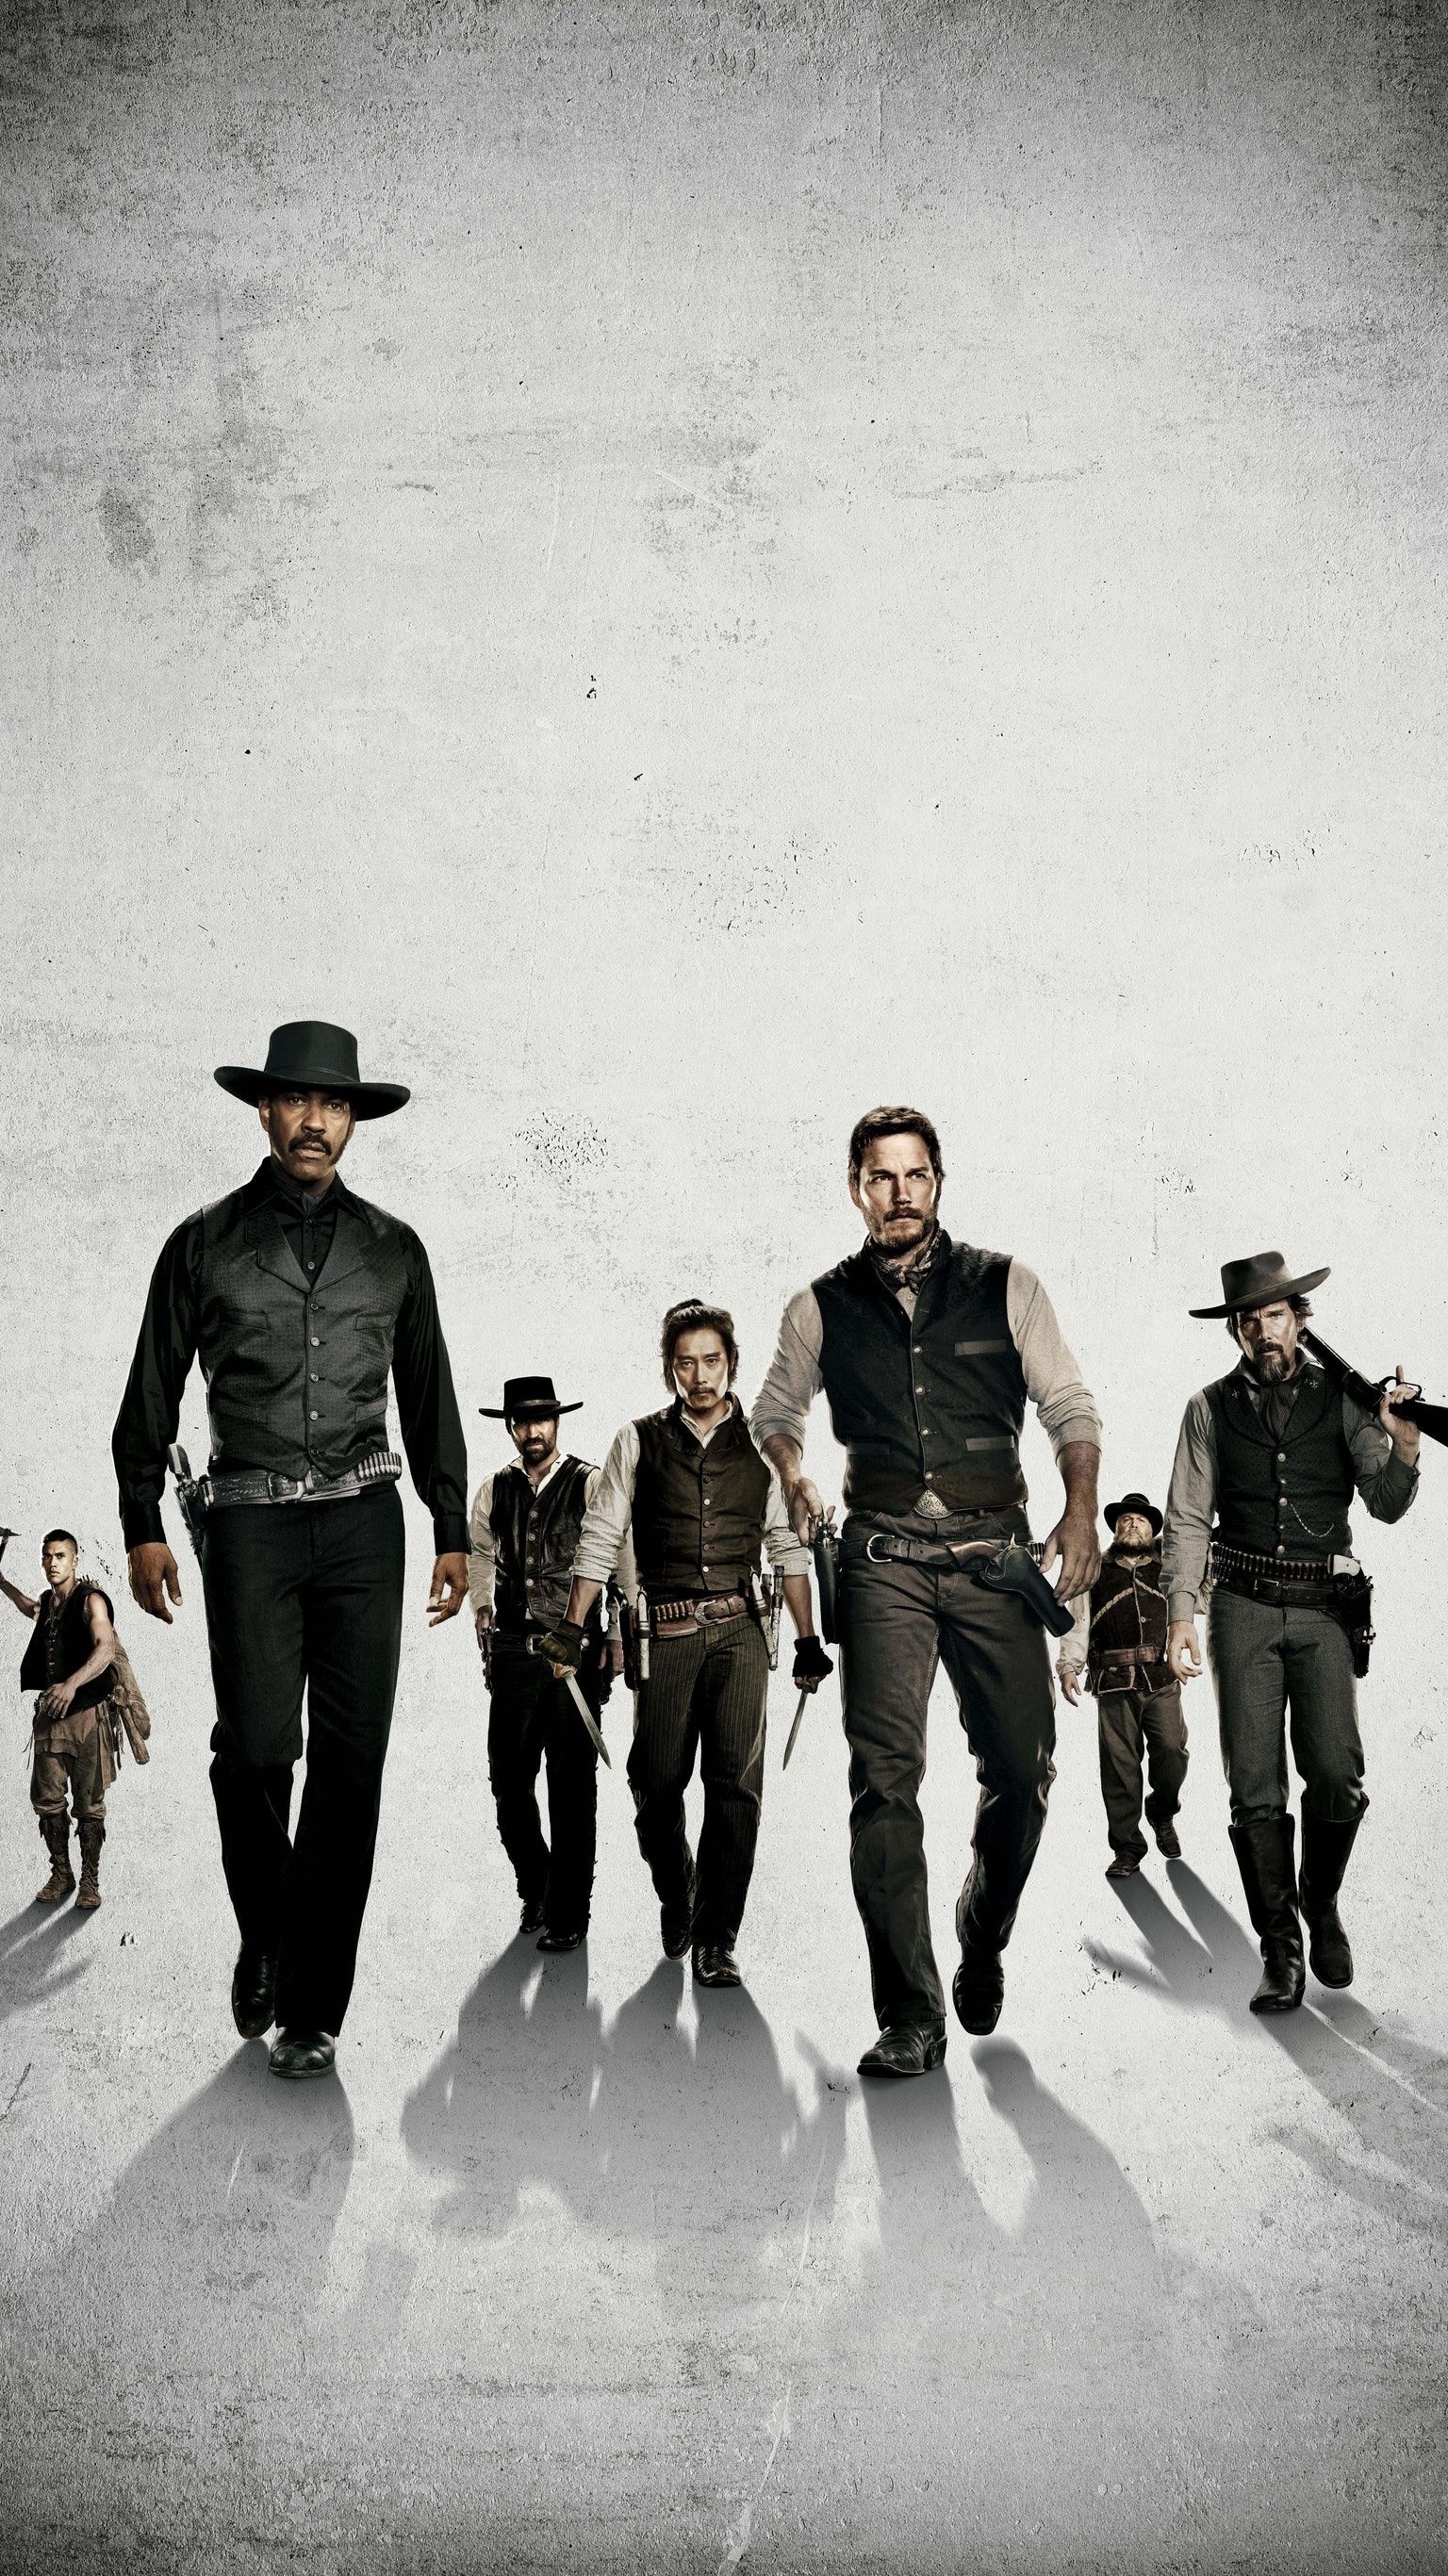 The Magnificent Seven, DVD cover wallpapers, Movie, 1540x2740 HD Handy